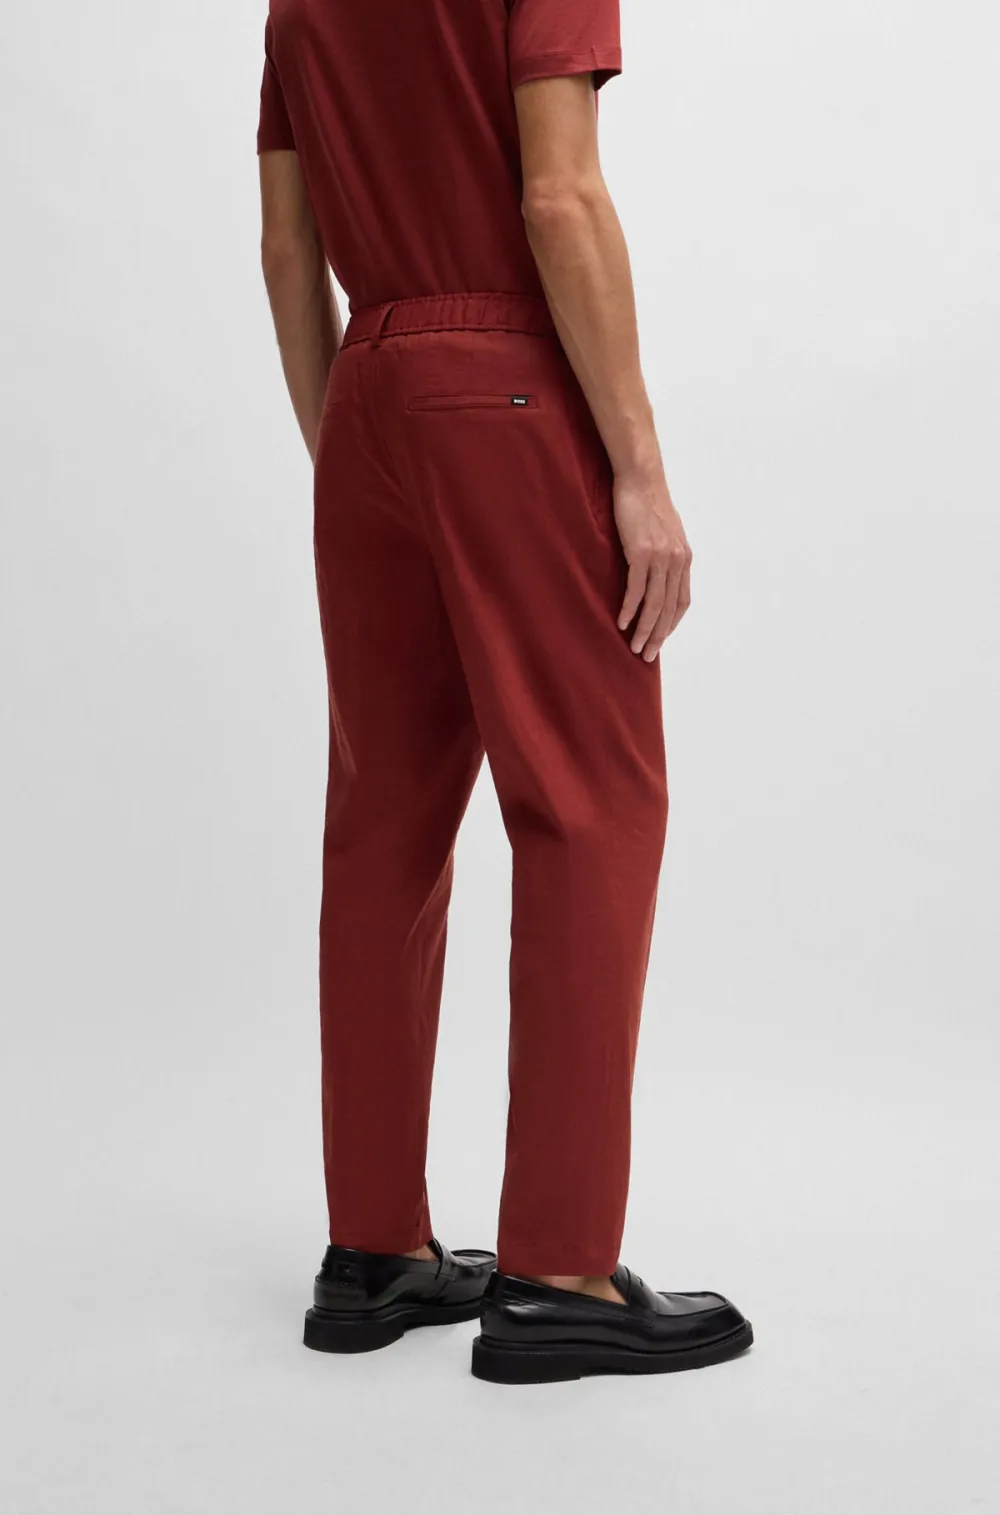 Relaxed-fit trousers in a linen blend